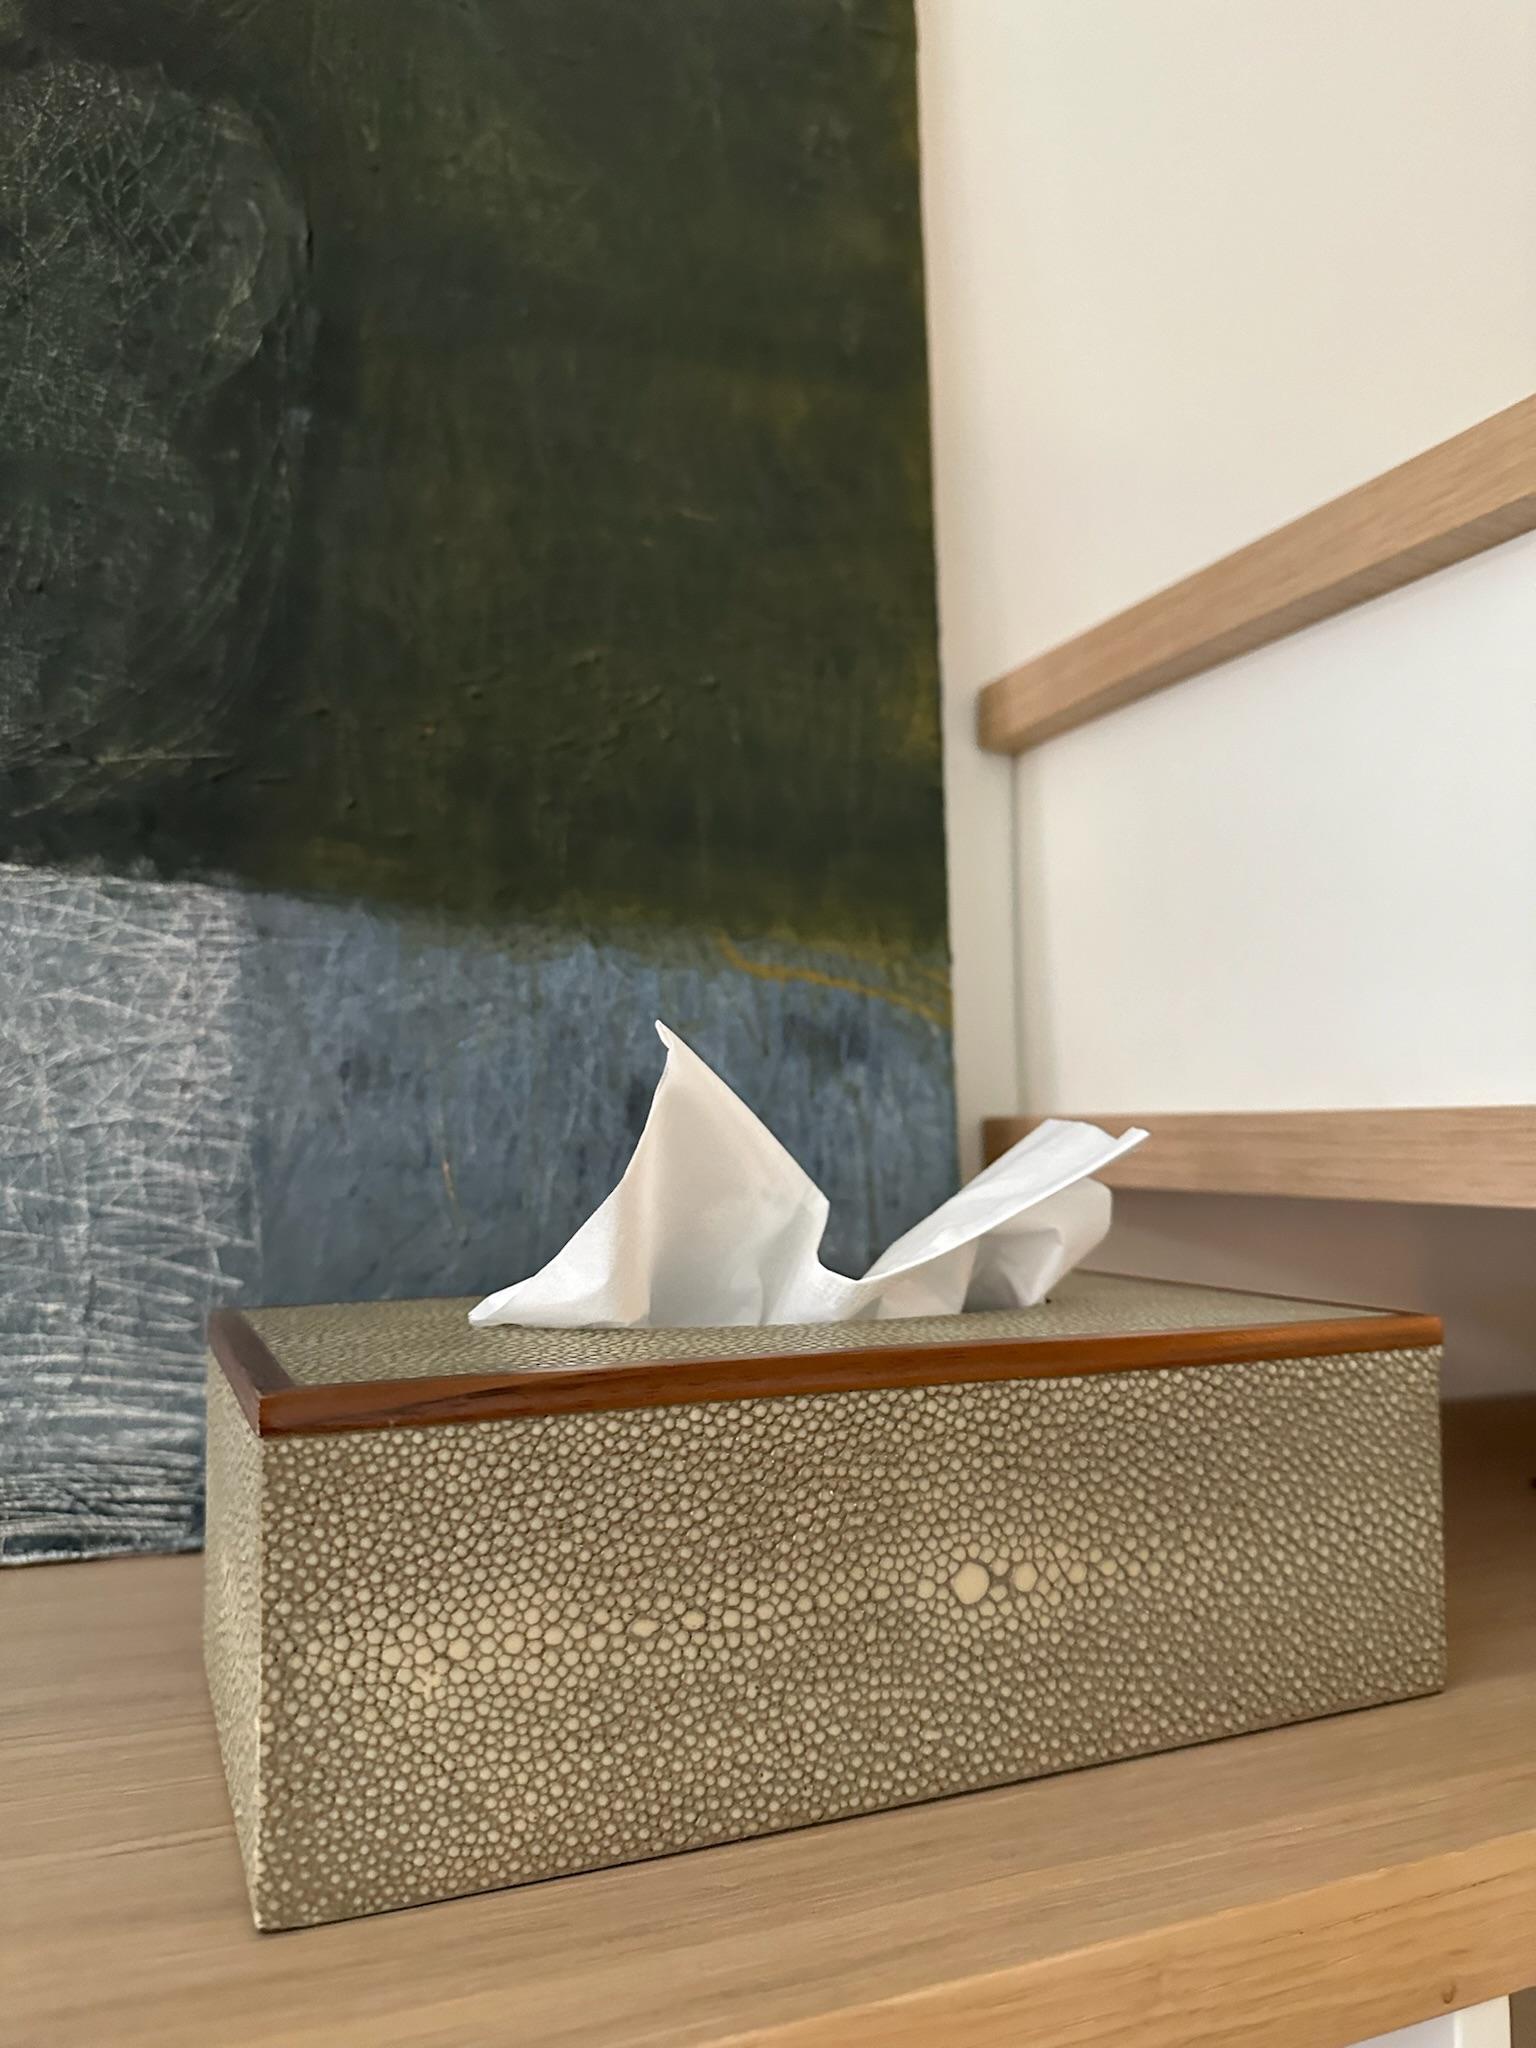 The outer sides of the tissue box are beautifully crafted to mimic the natural eye pattern of shagreen, topped with a veneer trim.